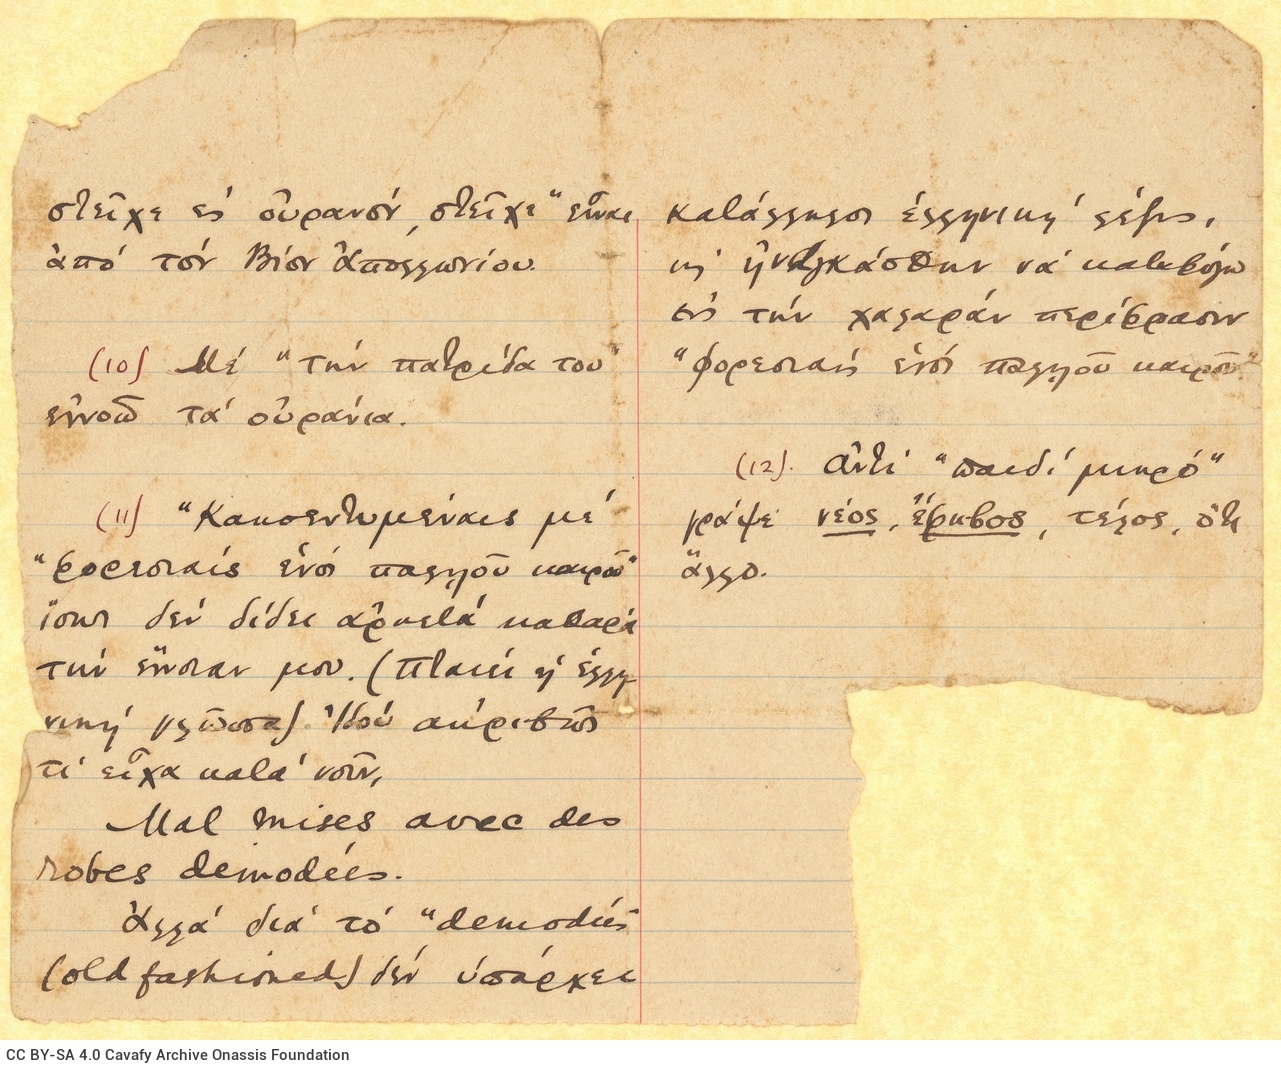 Fragment of handwritten notes by Cavafy on part of a ruled sheet, written in two columns and numbered (10, 11, 12), contai